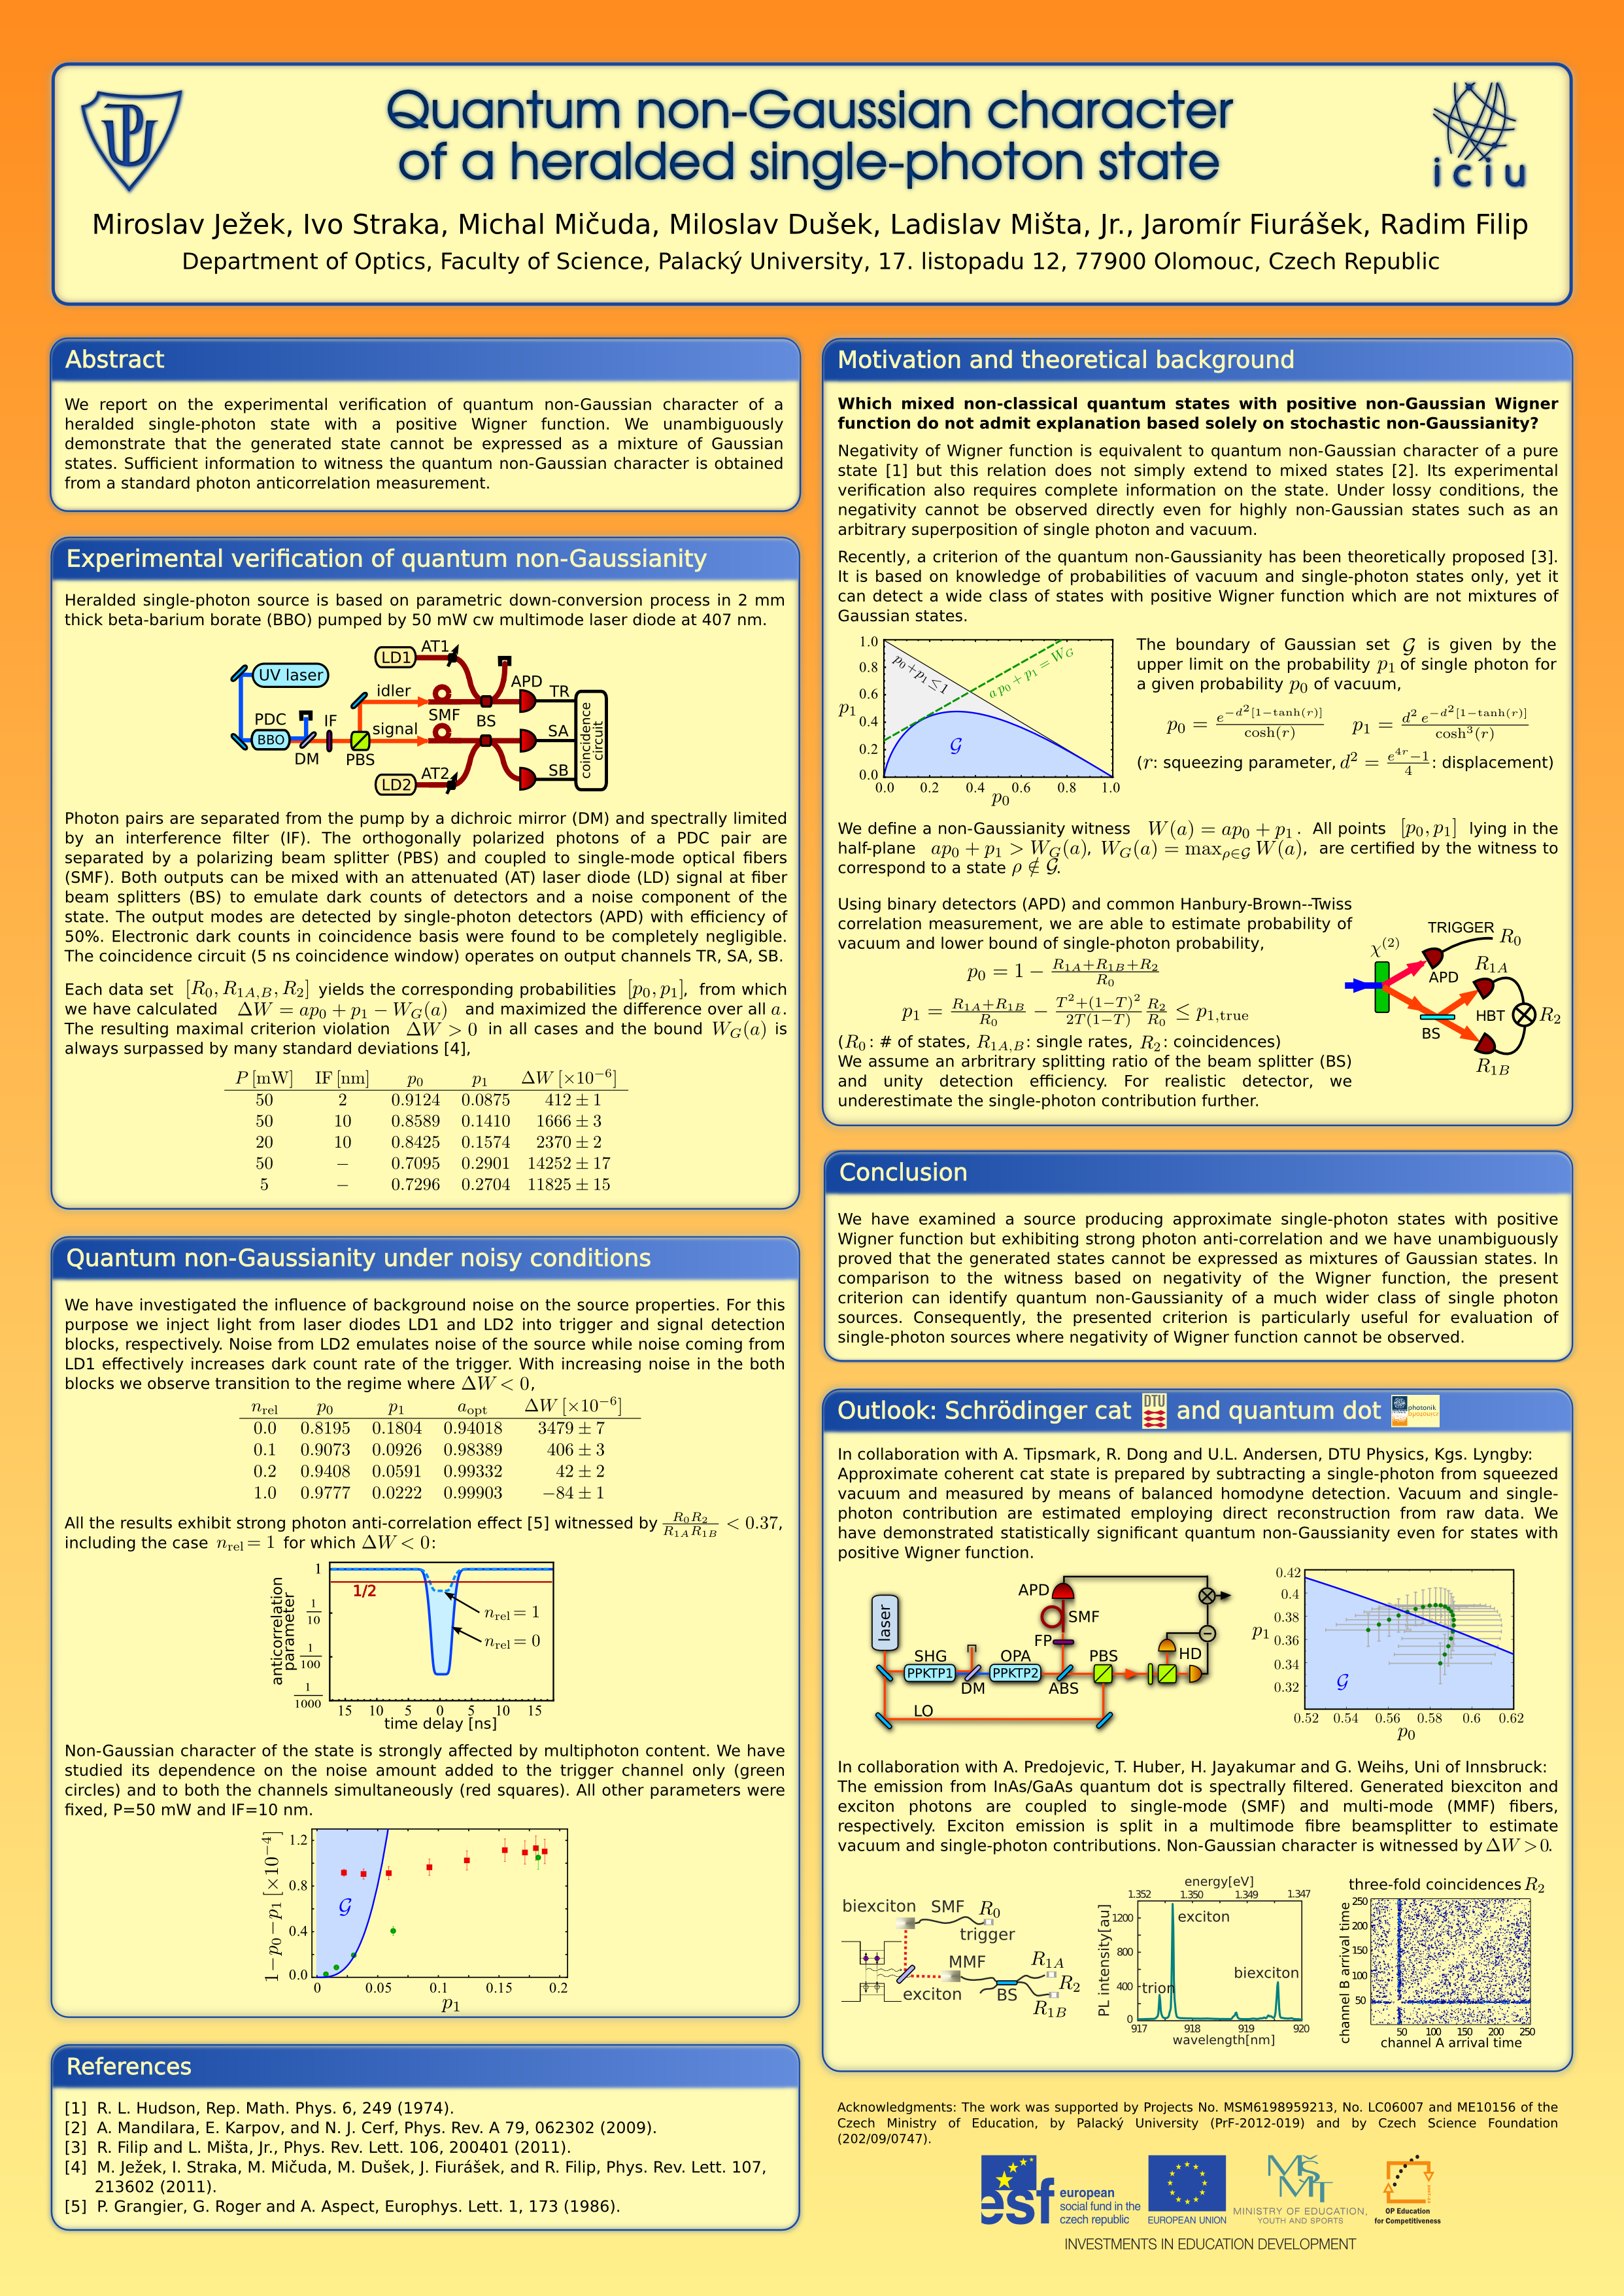 abstract for poster presentation example